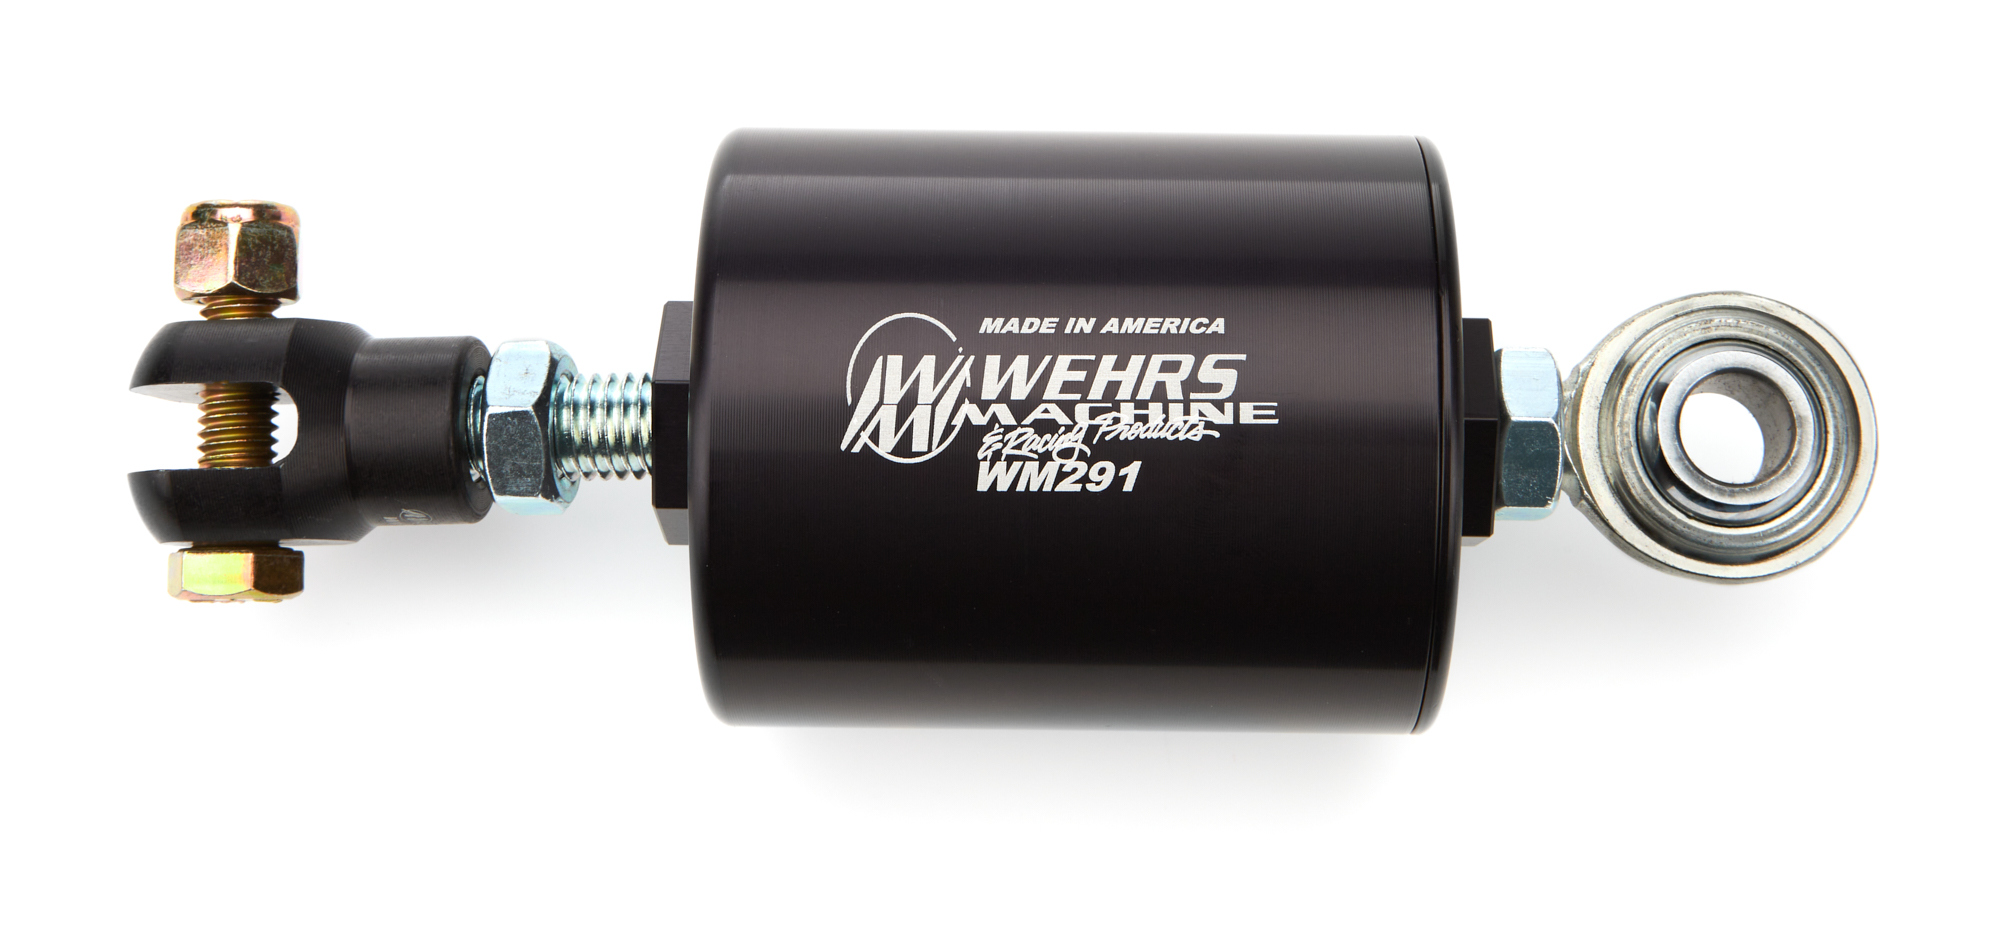 Wehrs Machine WM291 6th Coil, Bolt-On, 4.000 in Spring, Aluminum, Black Anodized, Kit